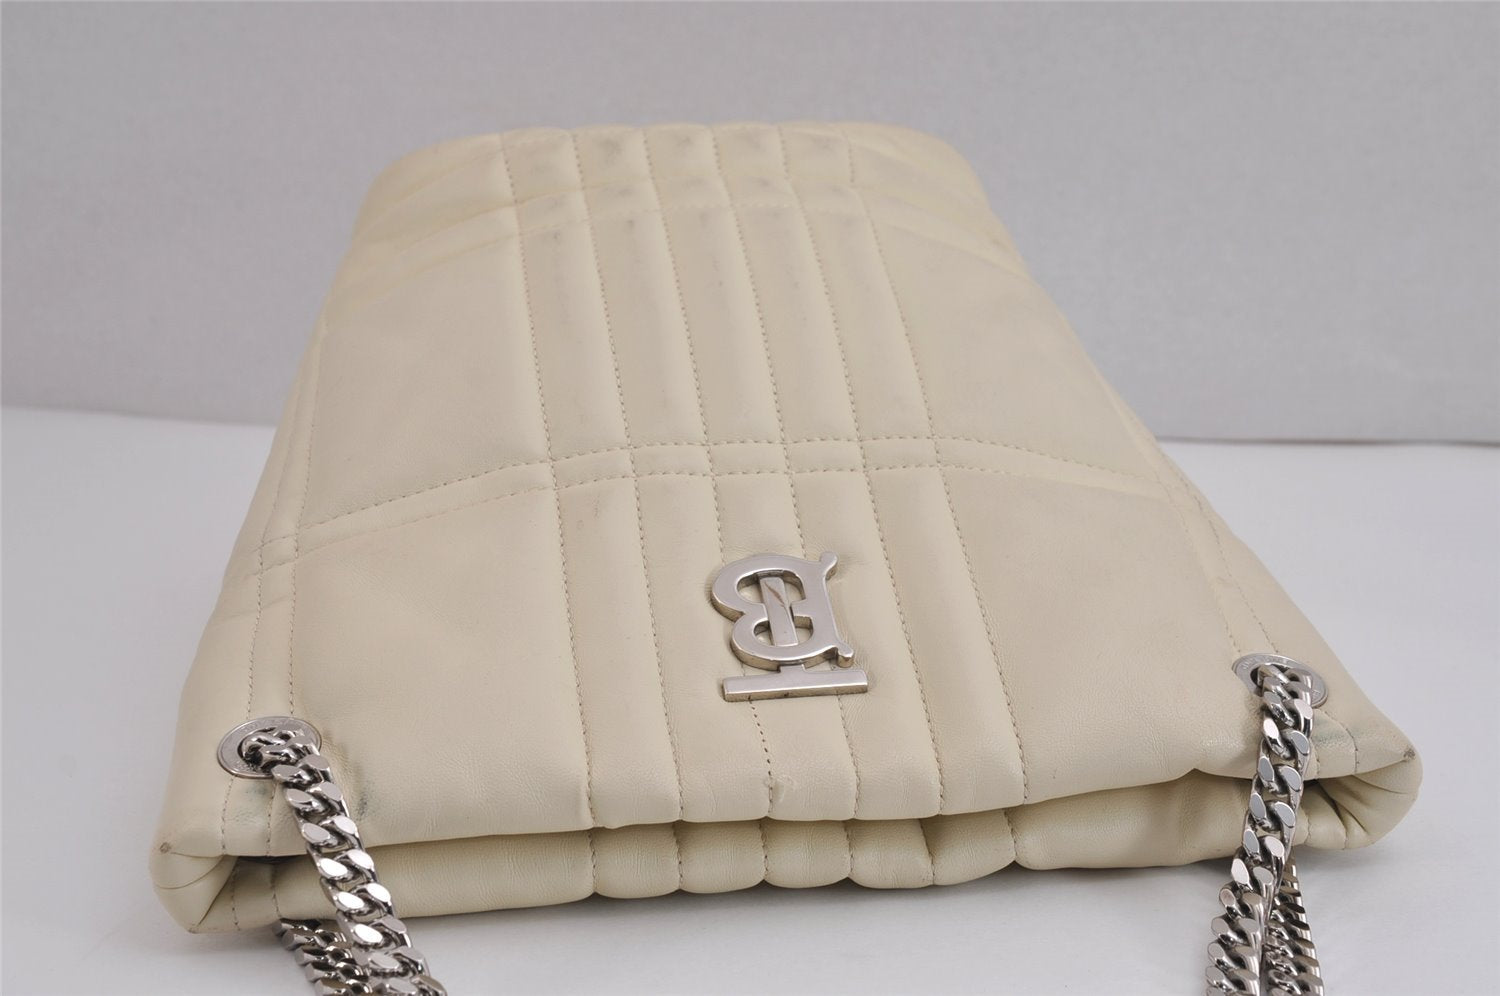 Authentic BURBERRY LOLA Leather Chain Shoulder Tote Bag White 5150J